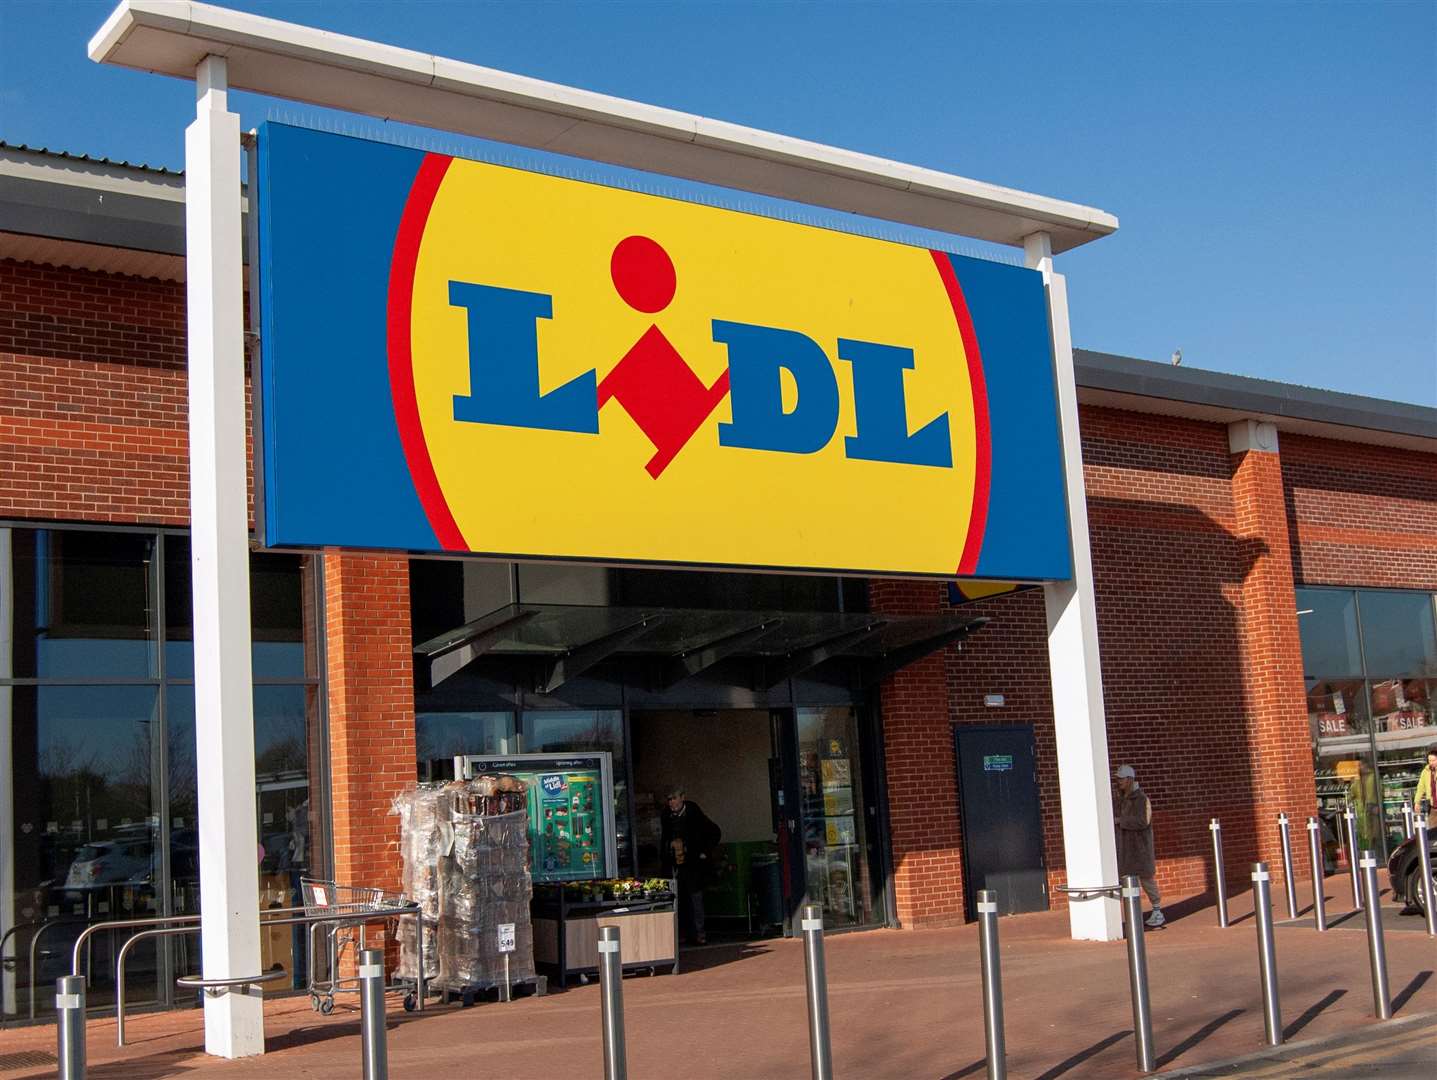 Lidl came second when it came to the cheapest basket of items